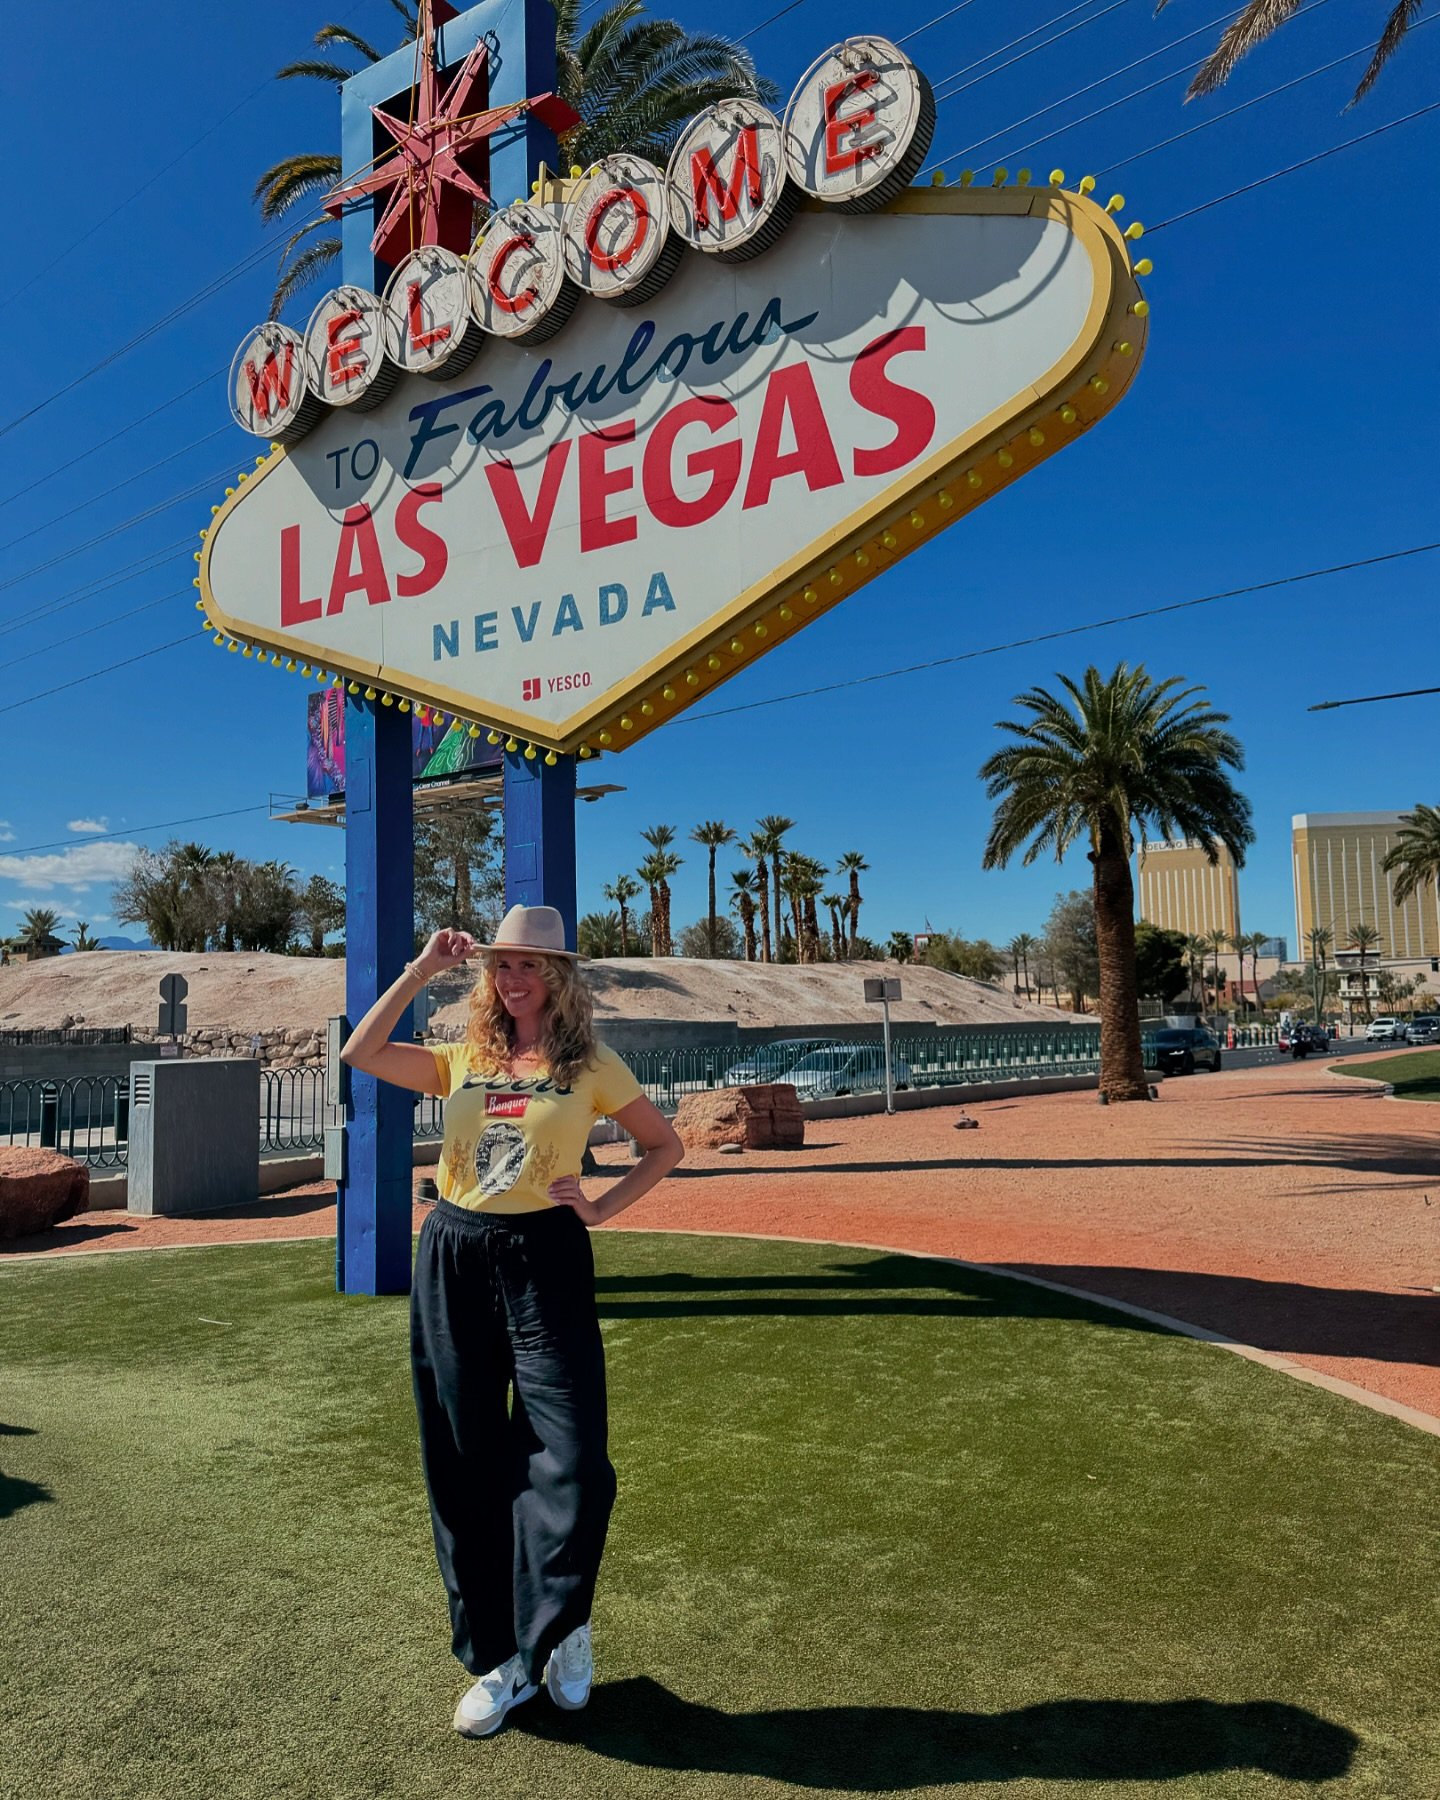 My latest Las Vegas blog post &ldquo;Beer + Beyond in Las Vegas, NV&rdquo; is up! 📝 

I spent some time road tripping from San Diego through Nevada and found myself surprised with all of the craft beer spots in Sin City. 

Check out beer babe Jess d